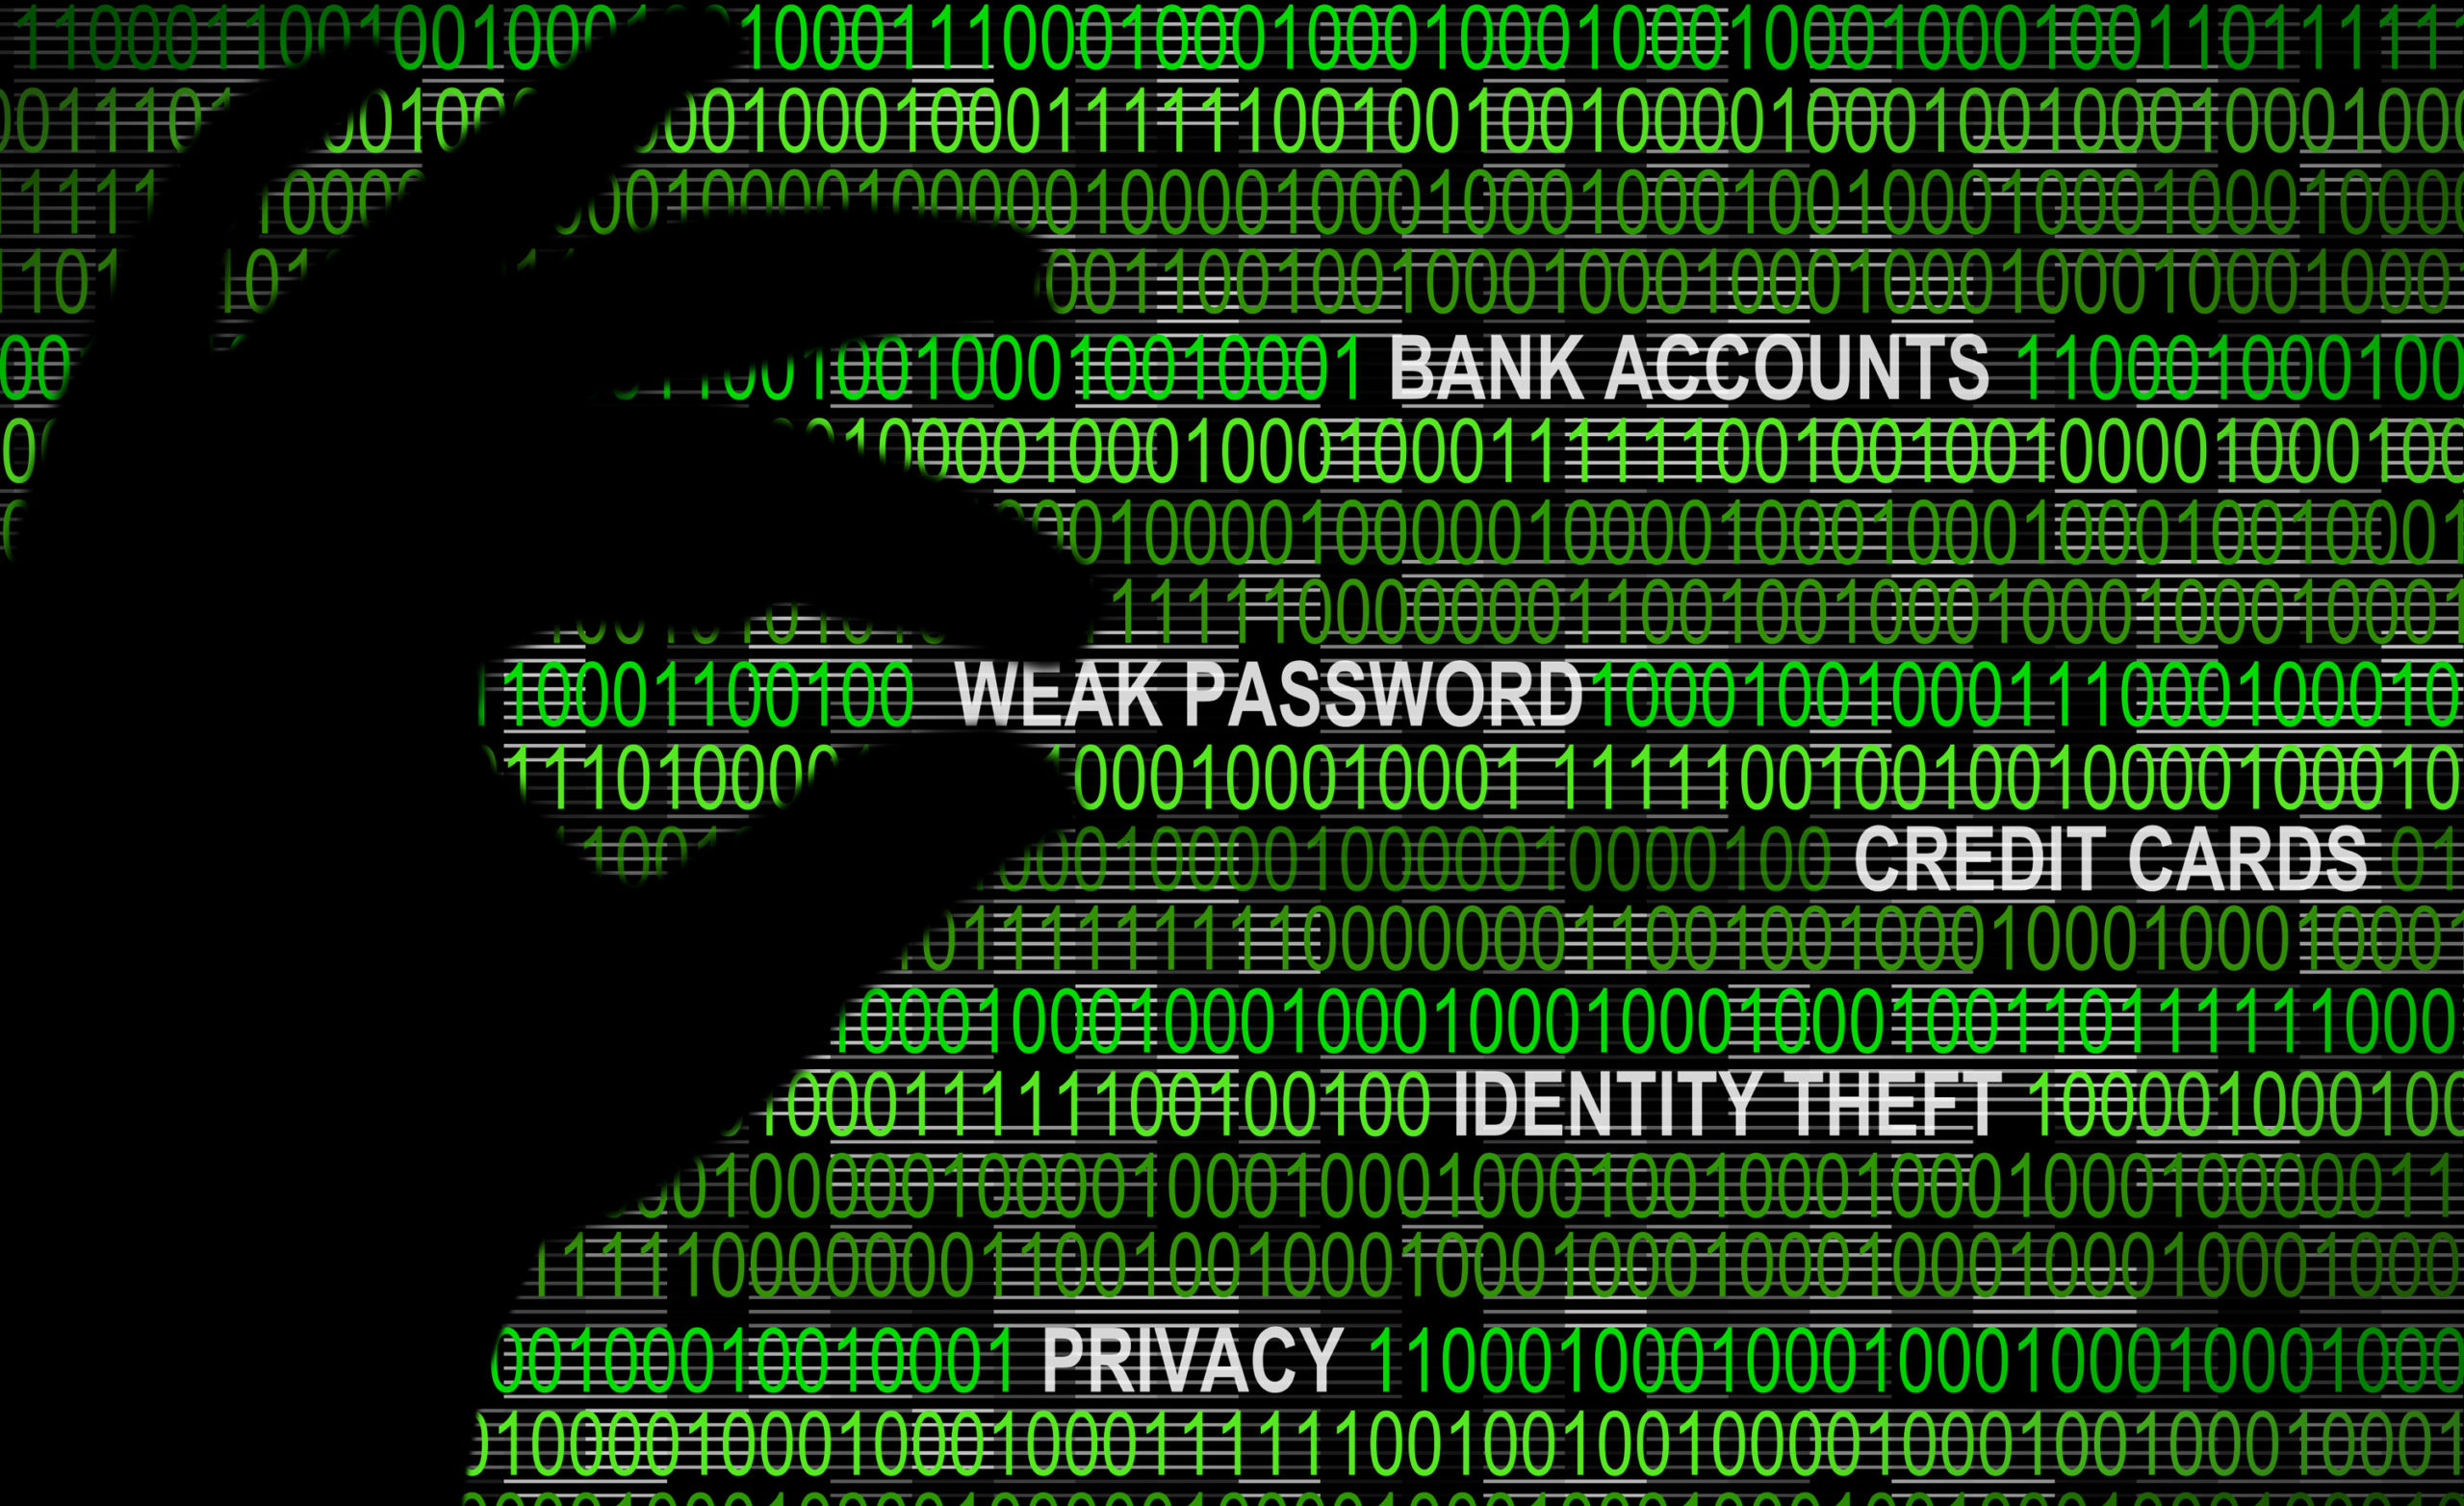 So your password manager was breached: What do you do now?